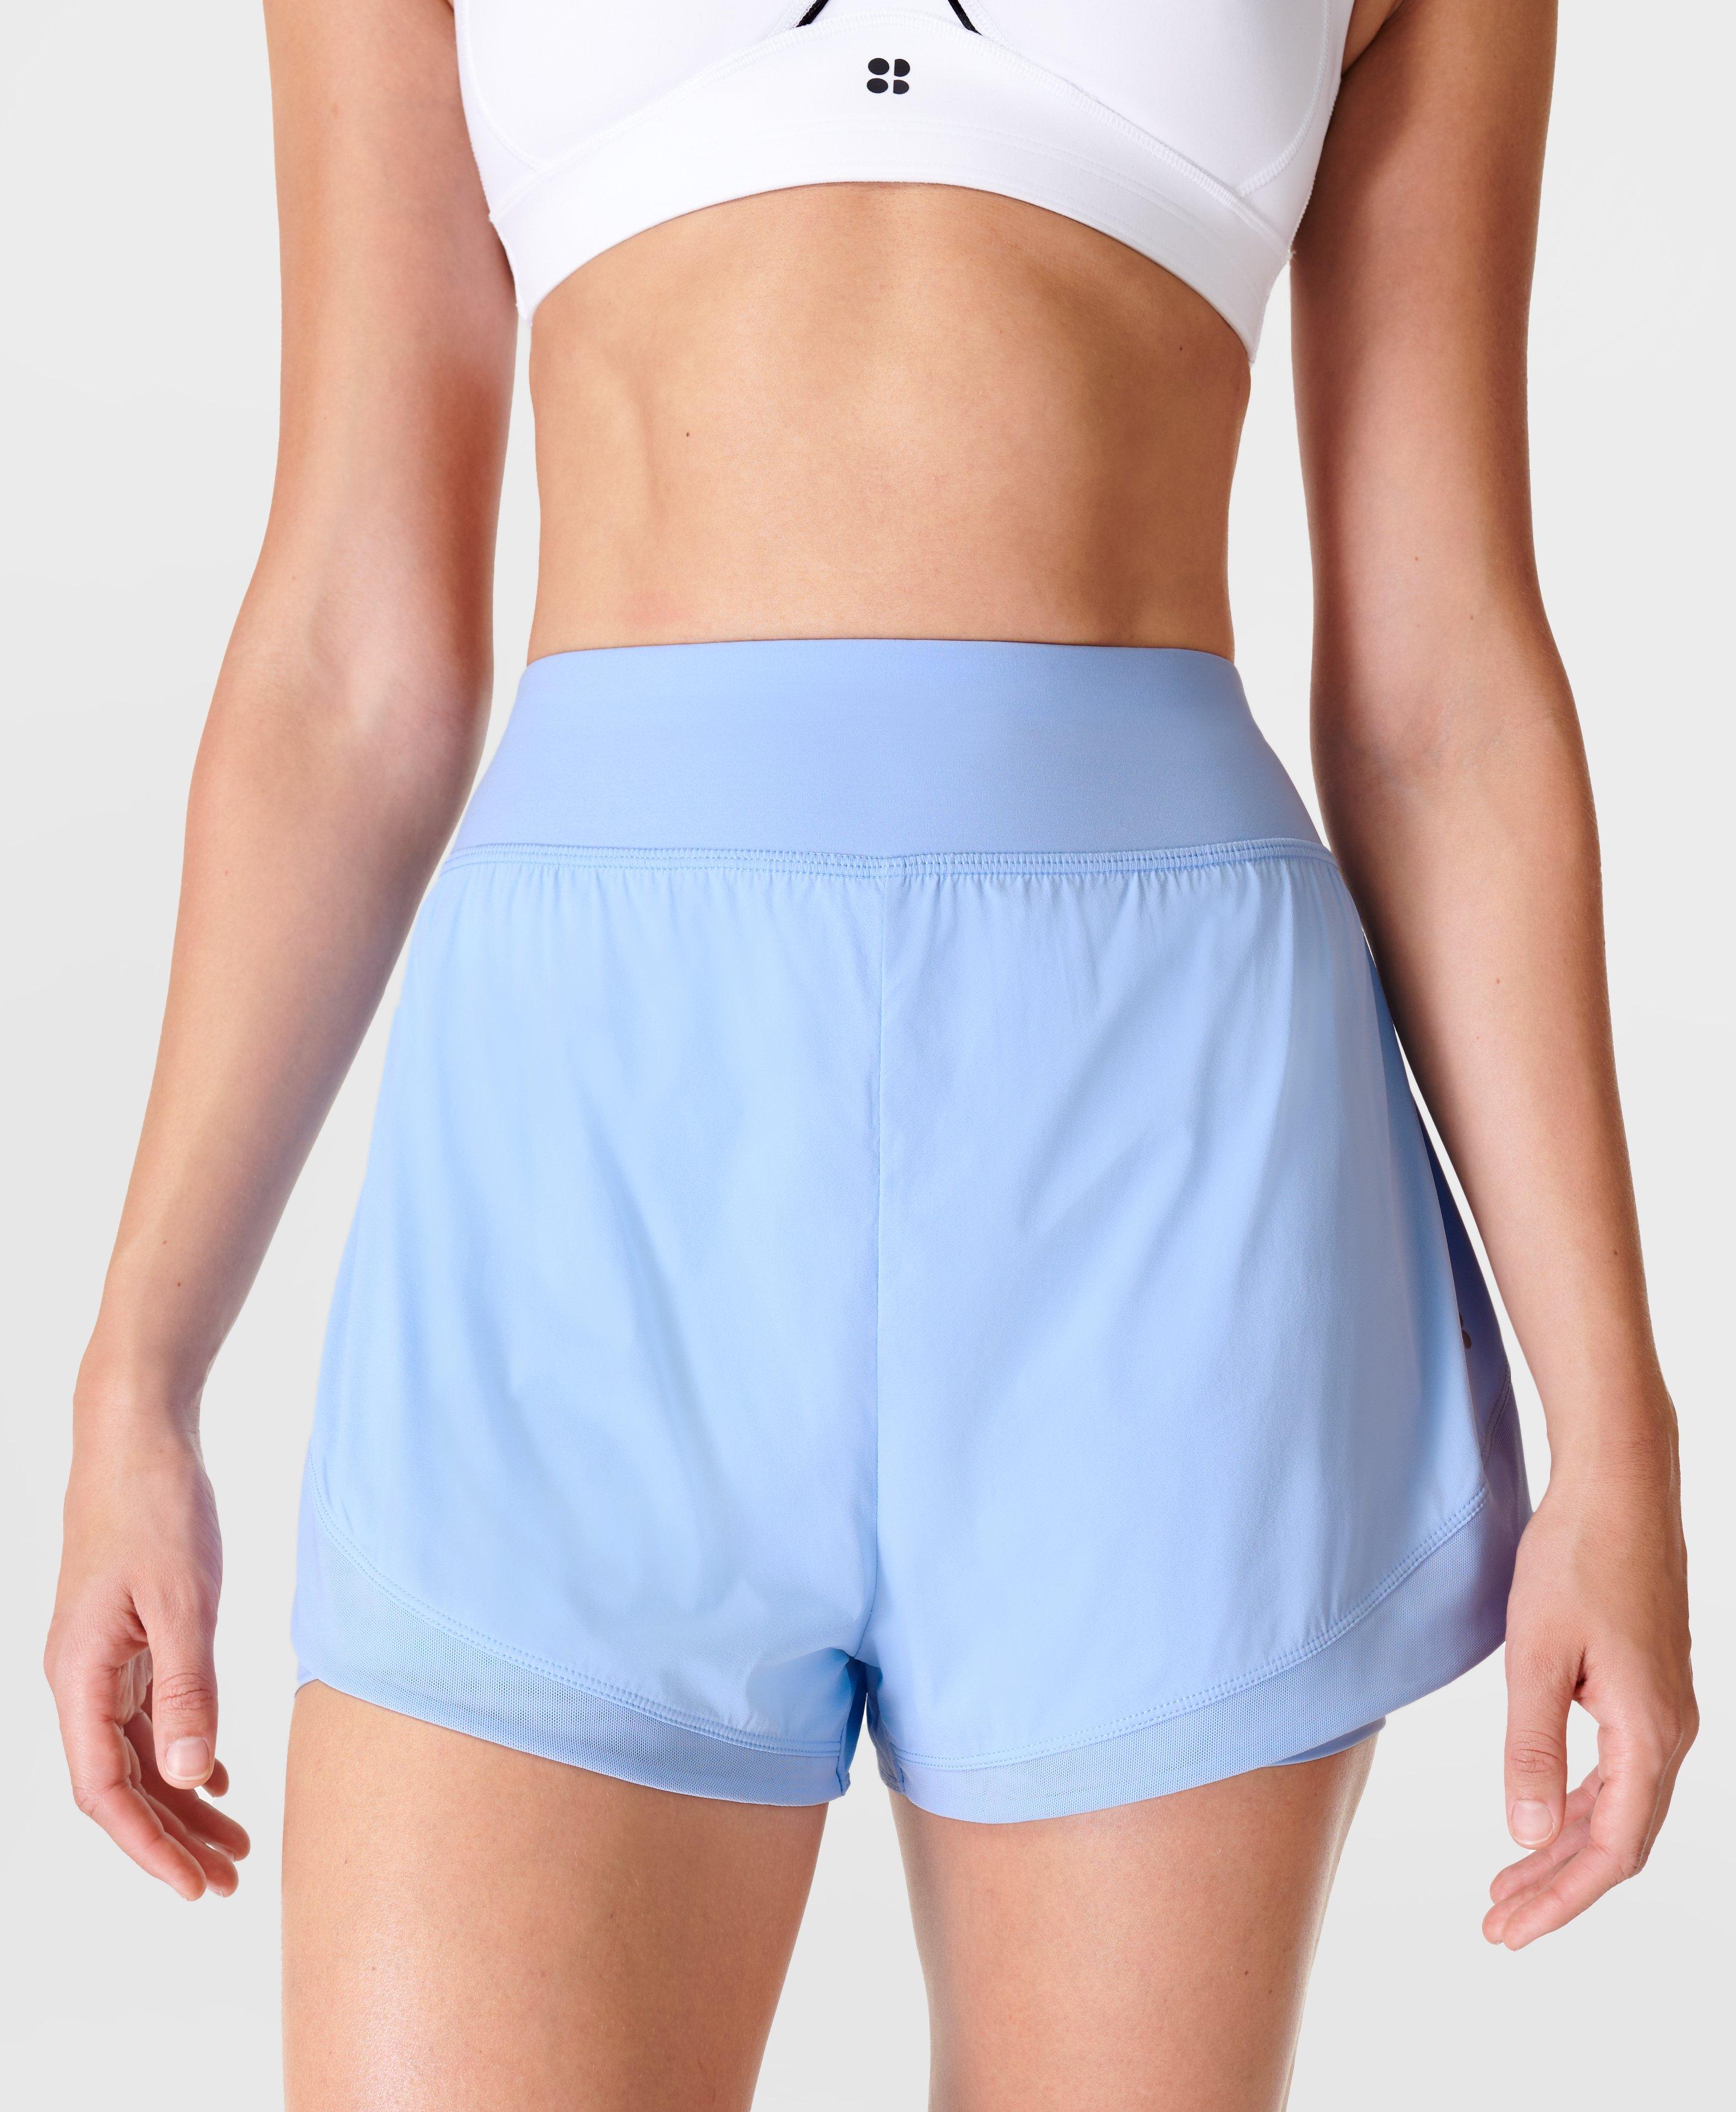 Sweaty Betty Anytime Pull-On Shorts & Reviews